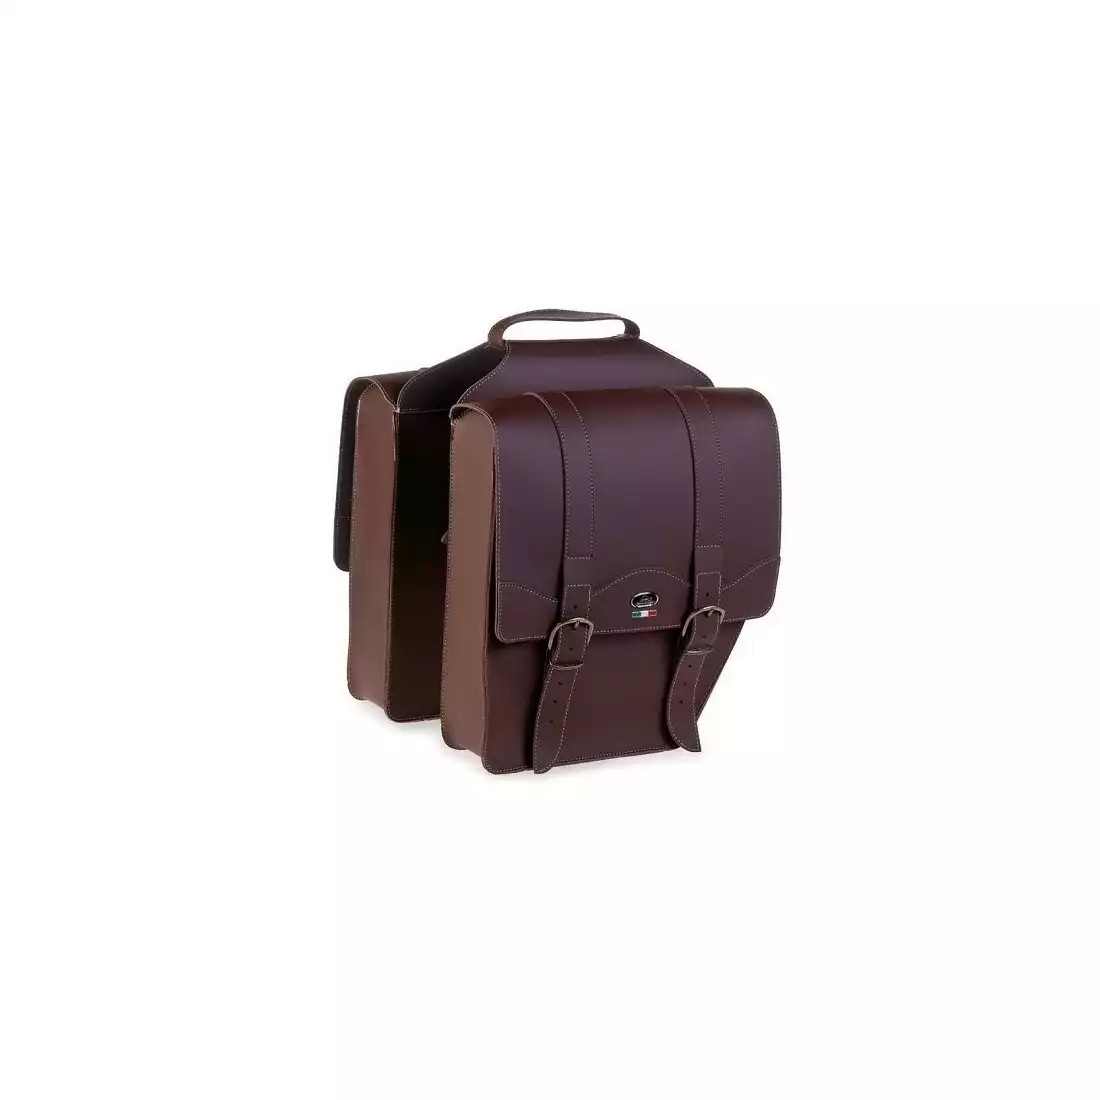 SELLE MONTE GRAPPA CRUISER bicycle pannier for the trunk, brown